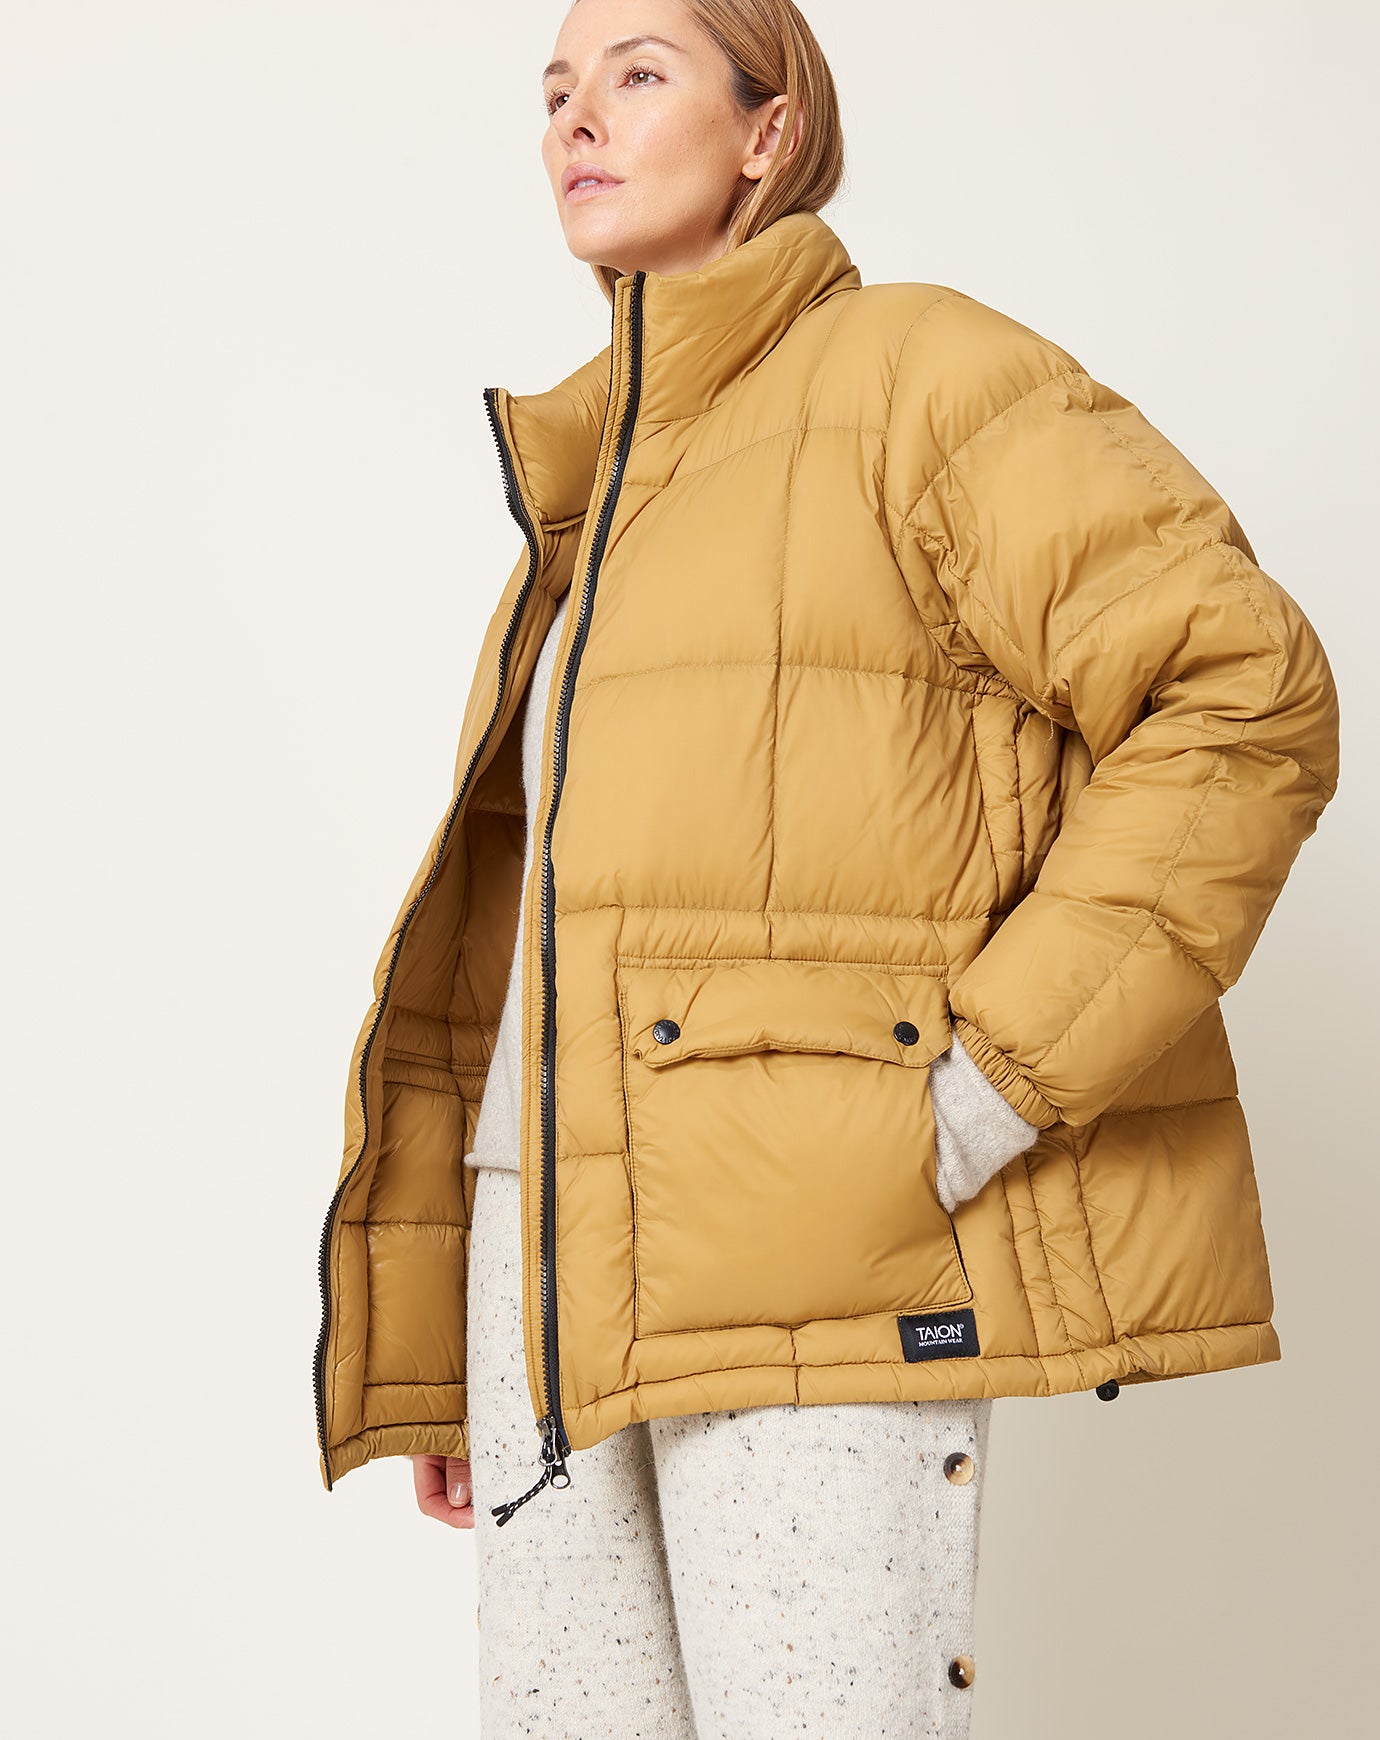 Taion Mountain Packable Volume Down Jacket in Beige